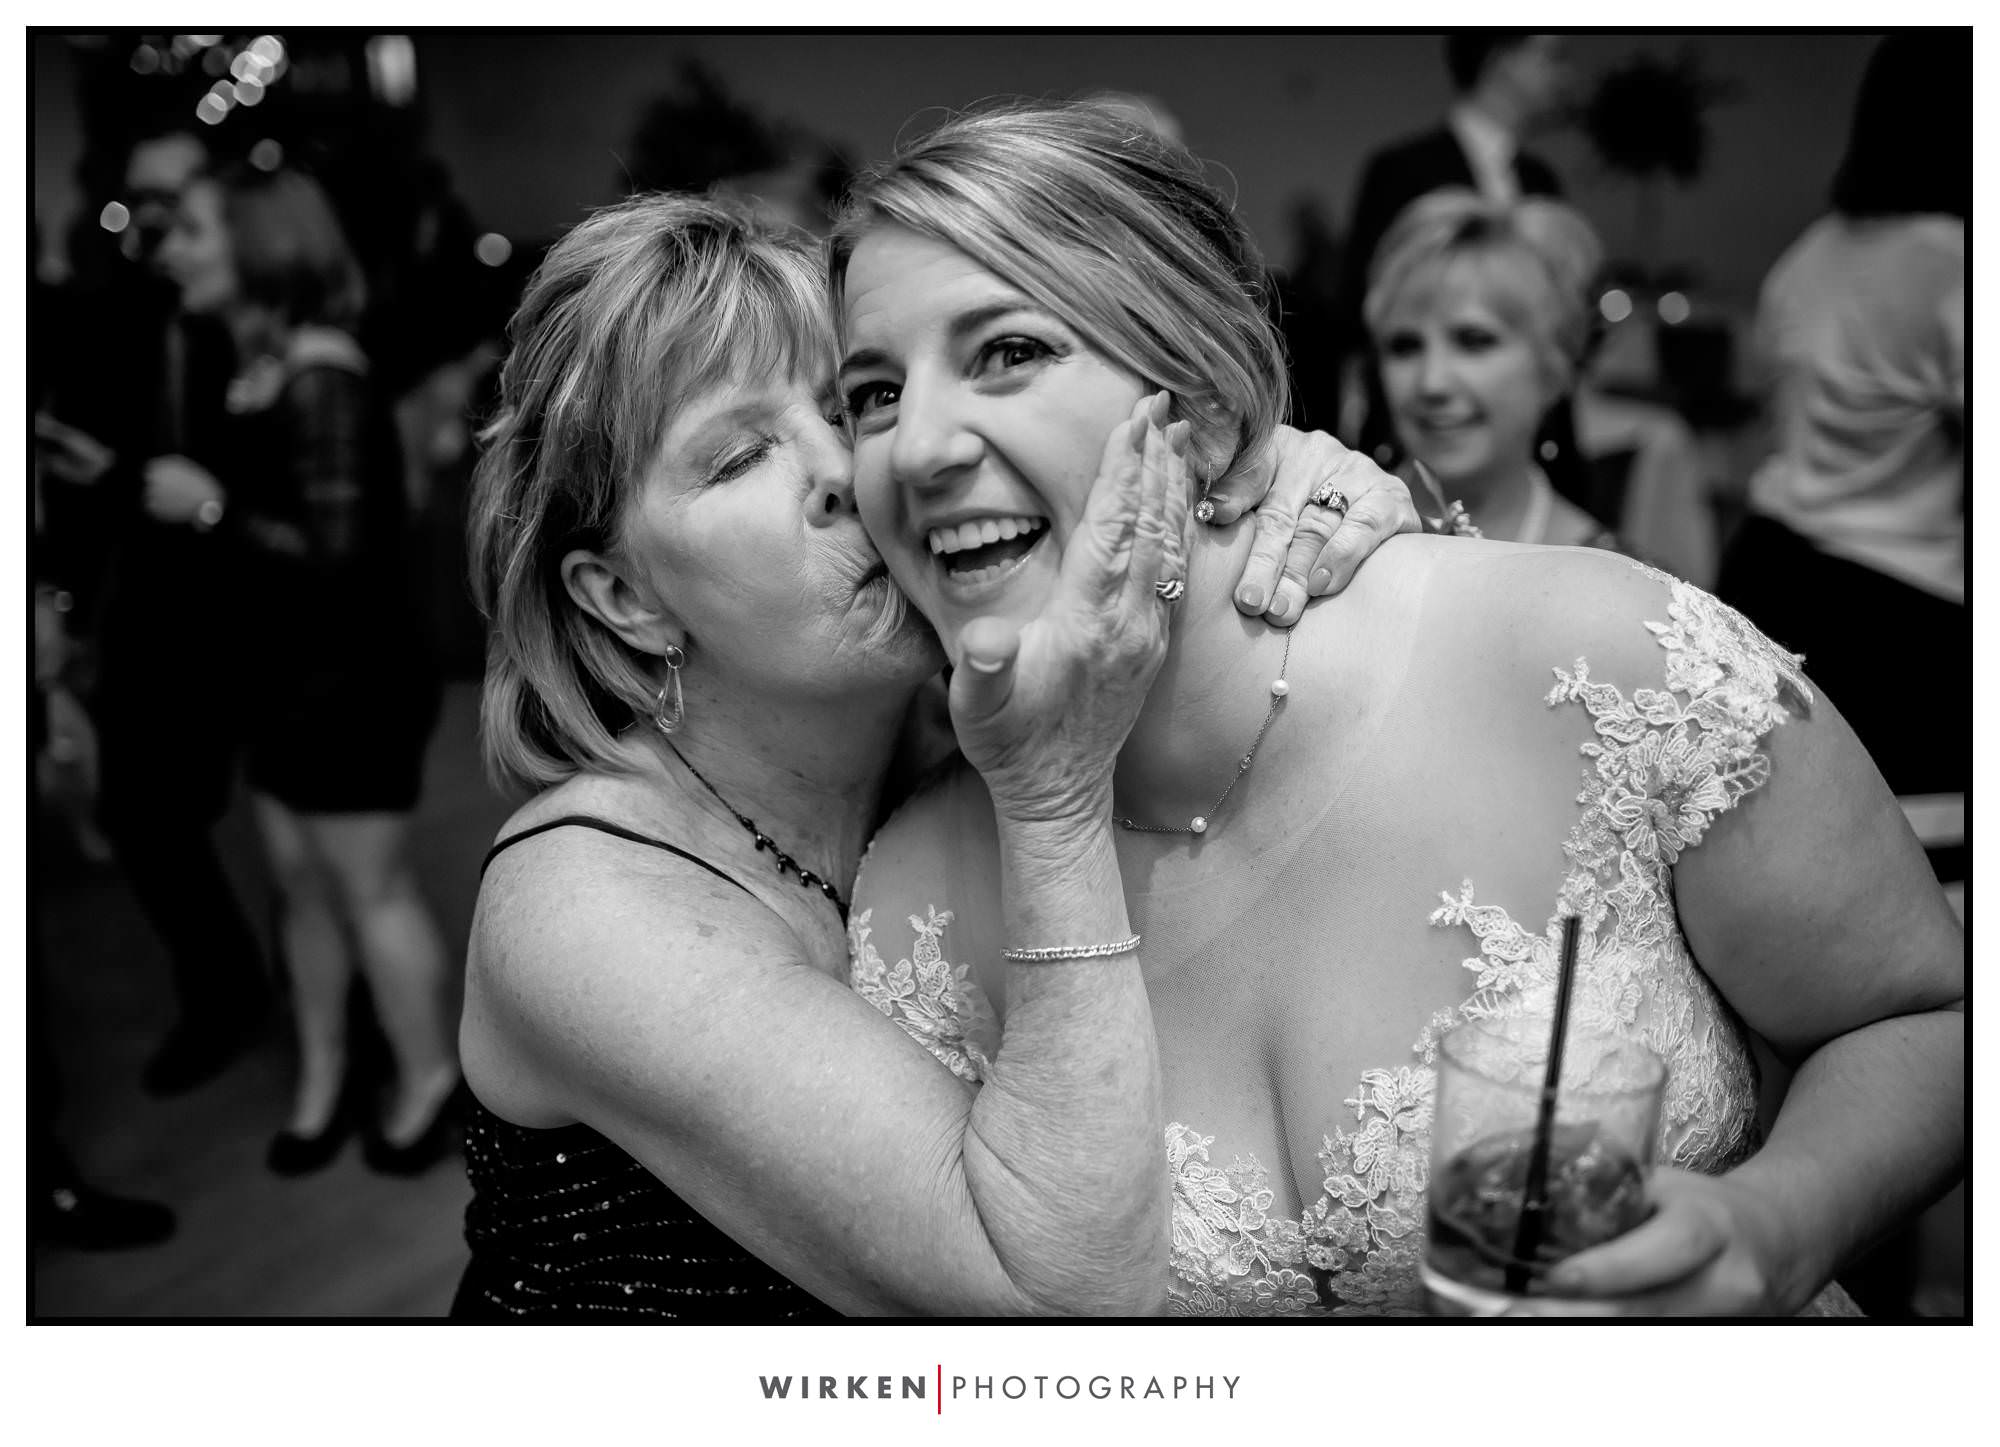 Leah gets a smooch from her mom at her wedding reception.